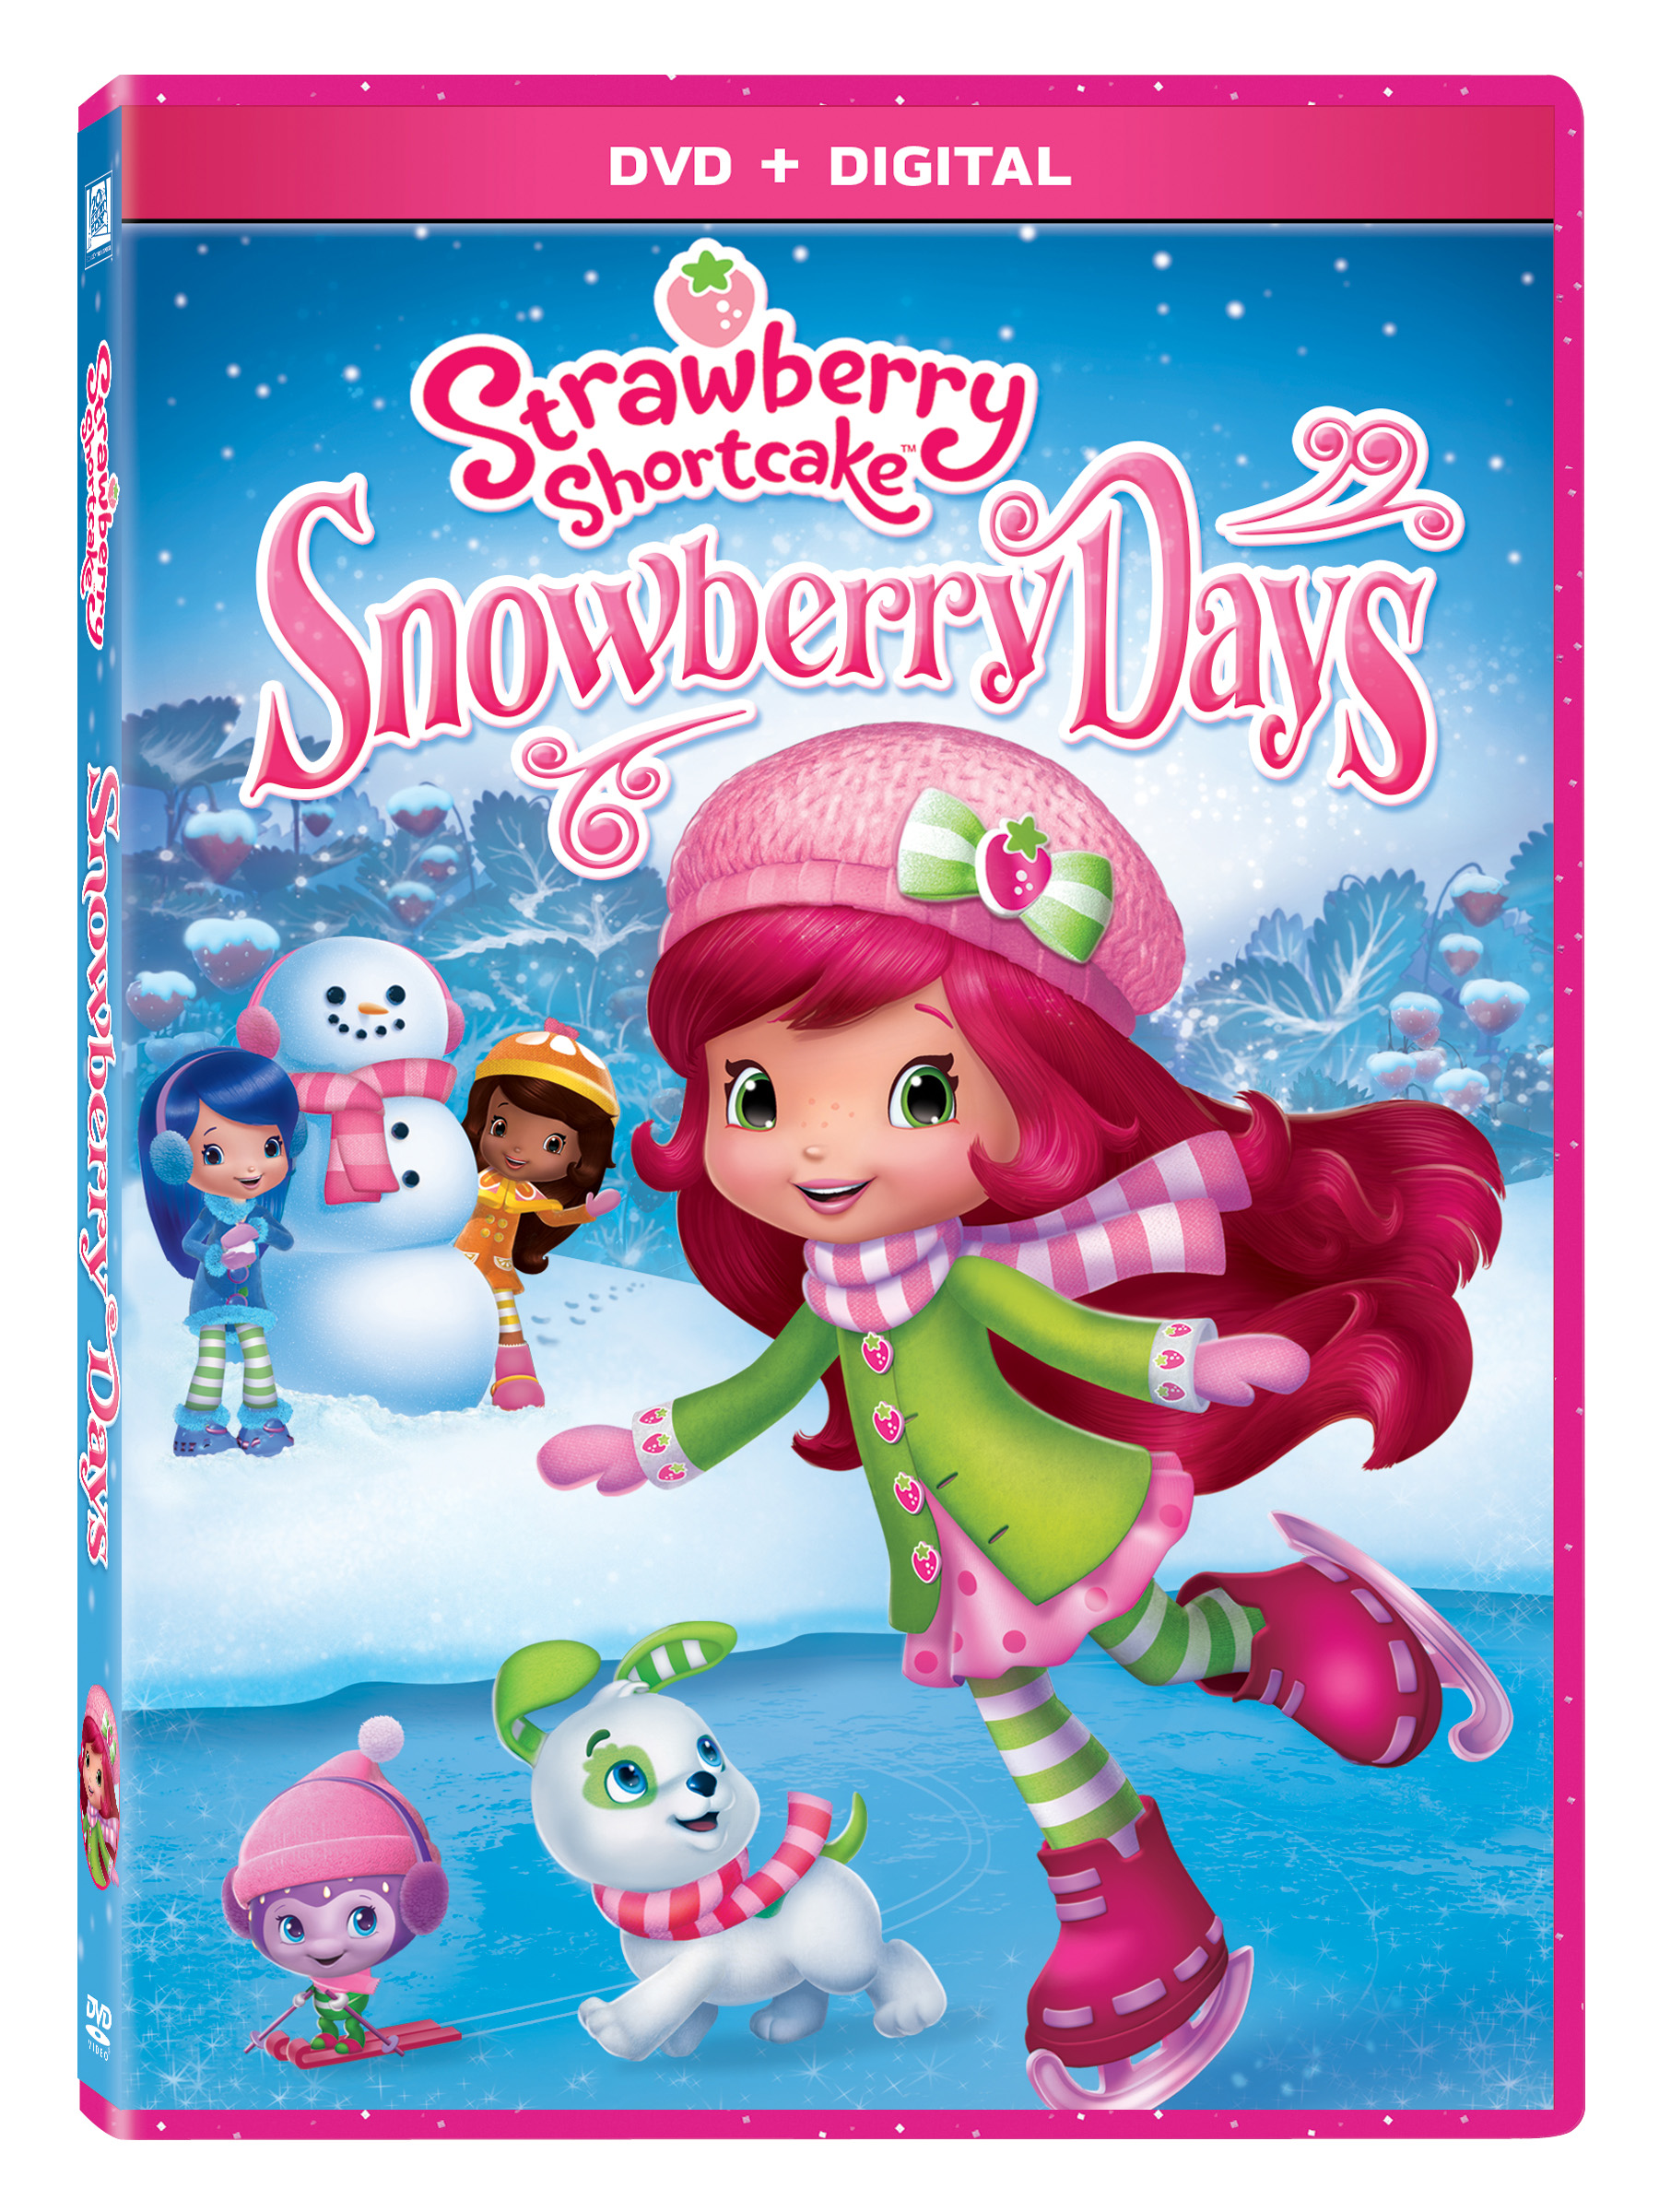 Strawberry Shortcake Free Printable Coloring Pages & Snowberry Days on DVD! {+ Giveaway!}